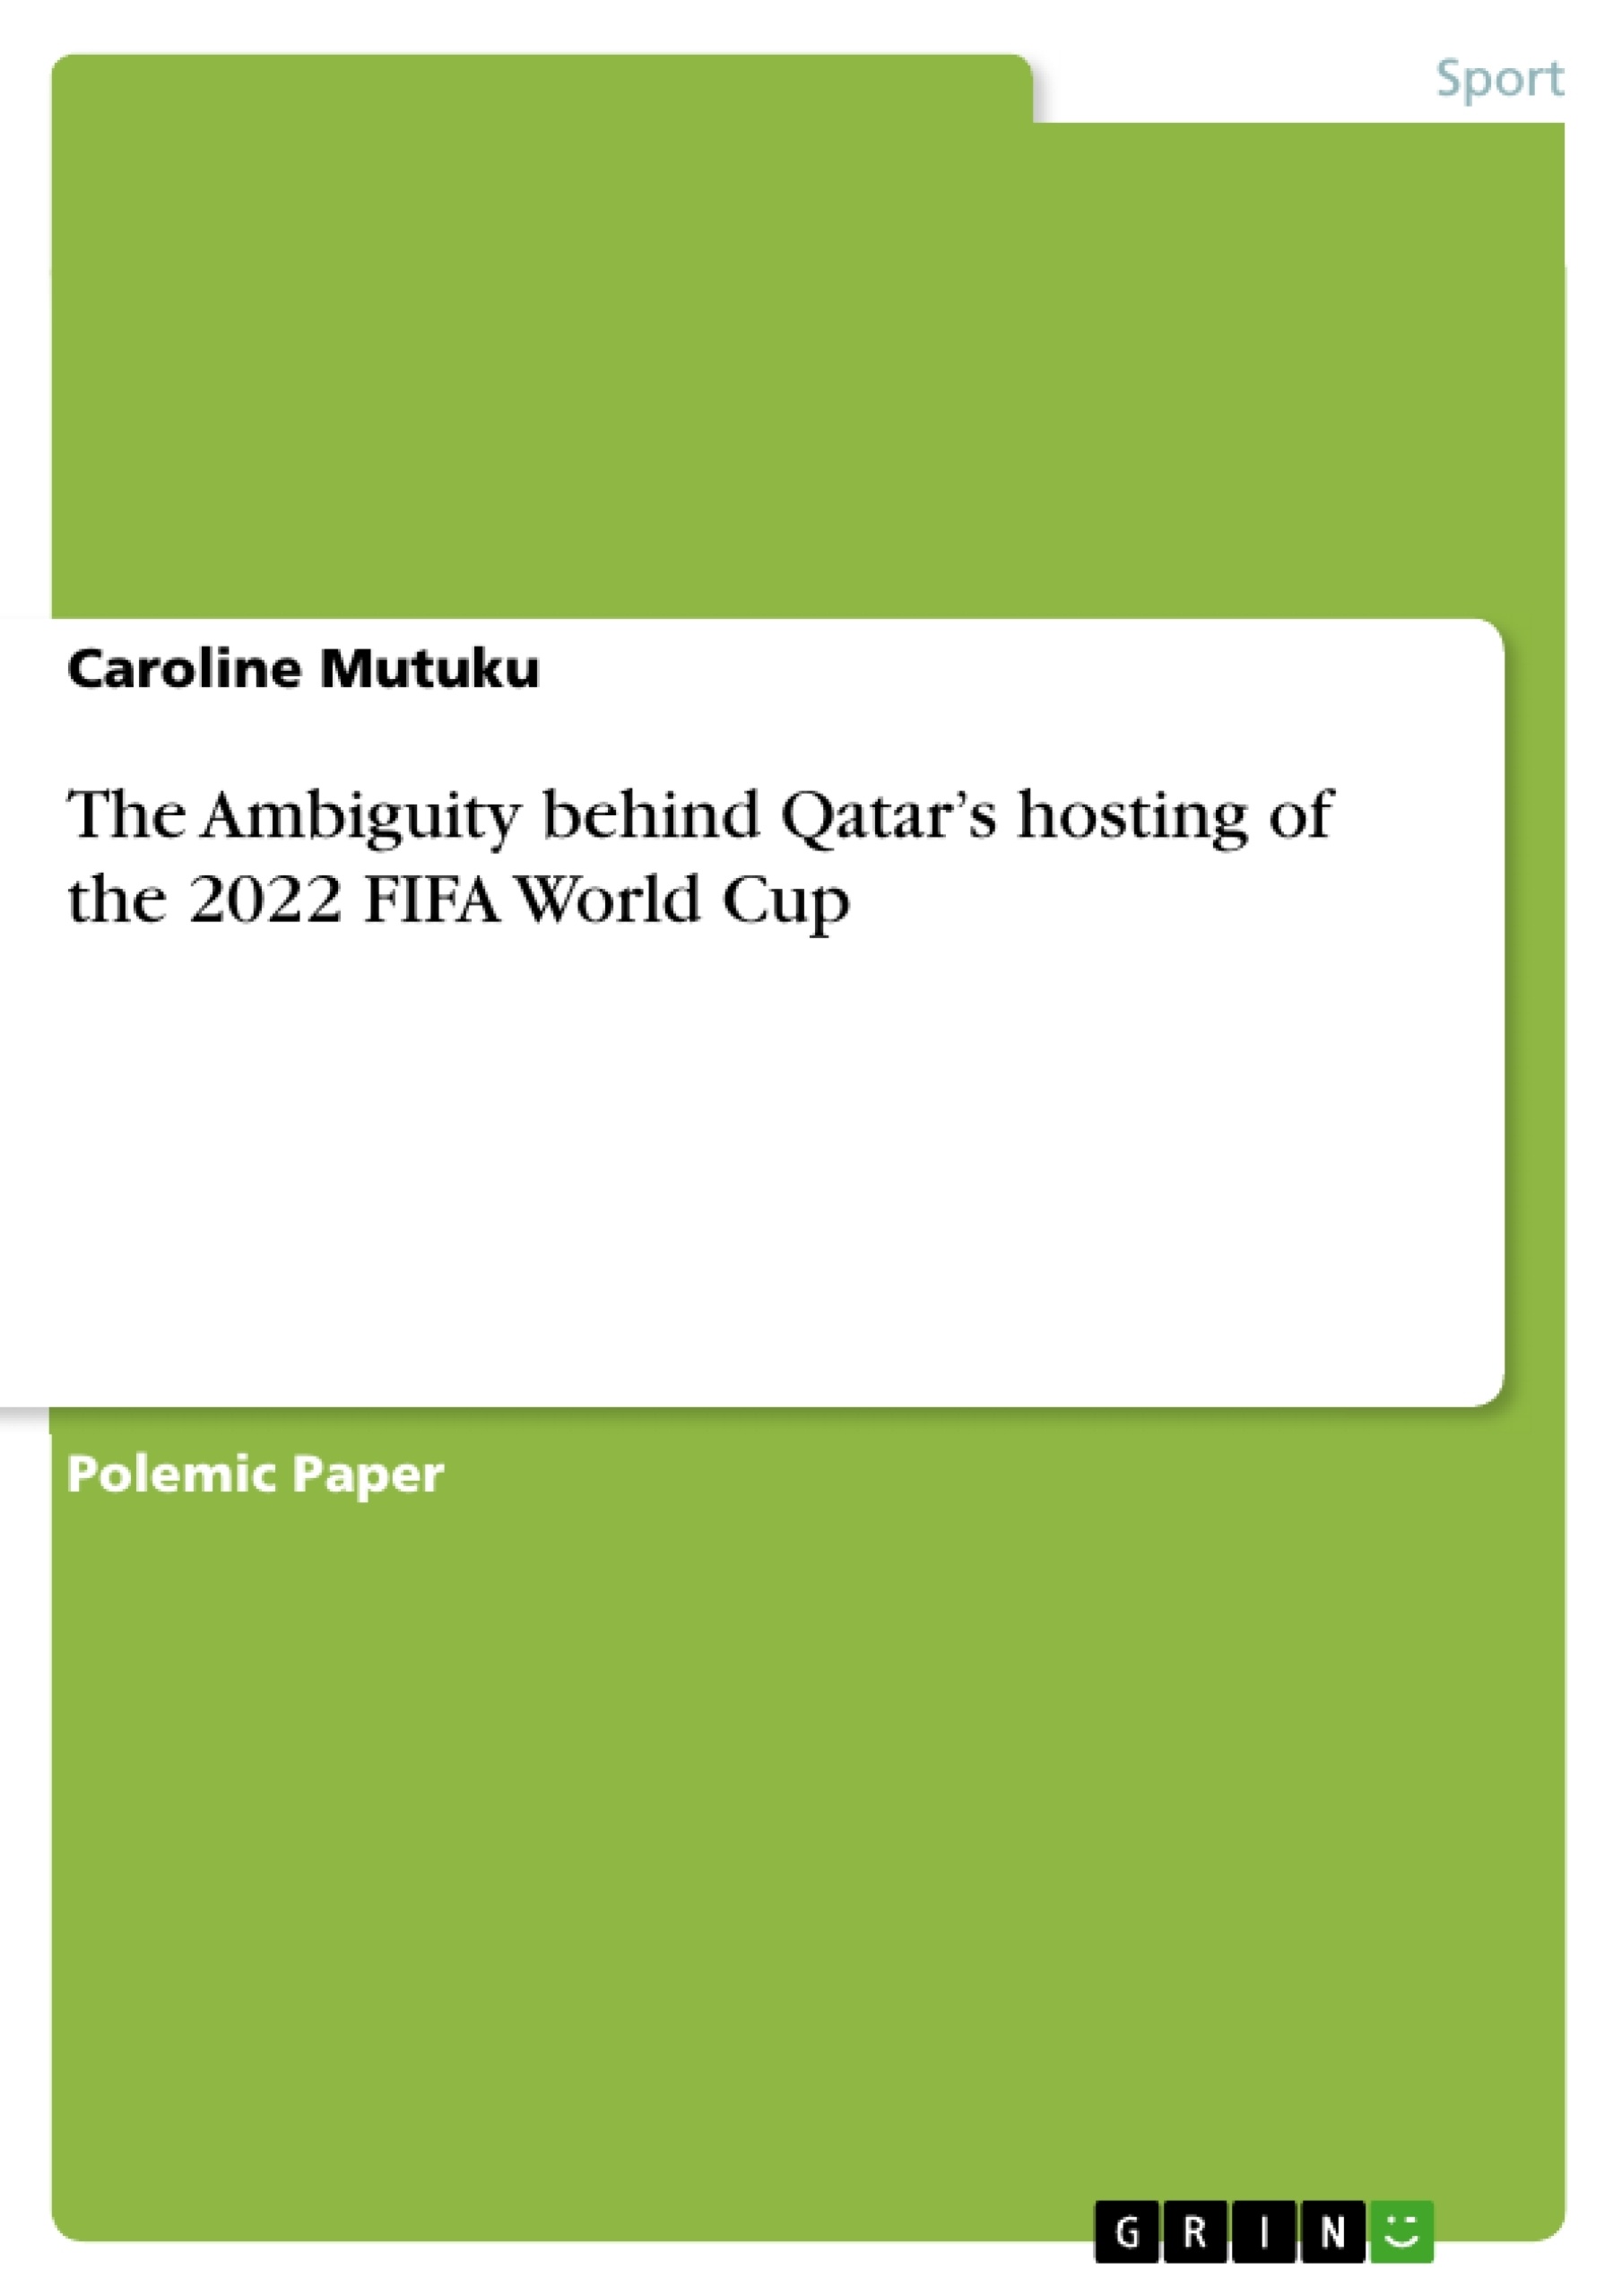 Titel: The Ambiguity behind Qatar’s hosting of the 2022 FIFA World Cup